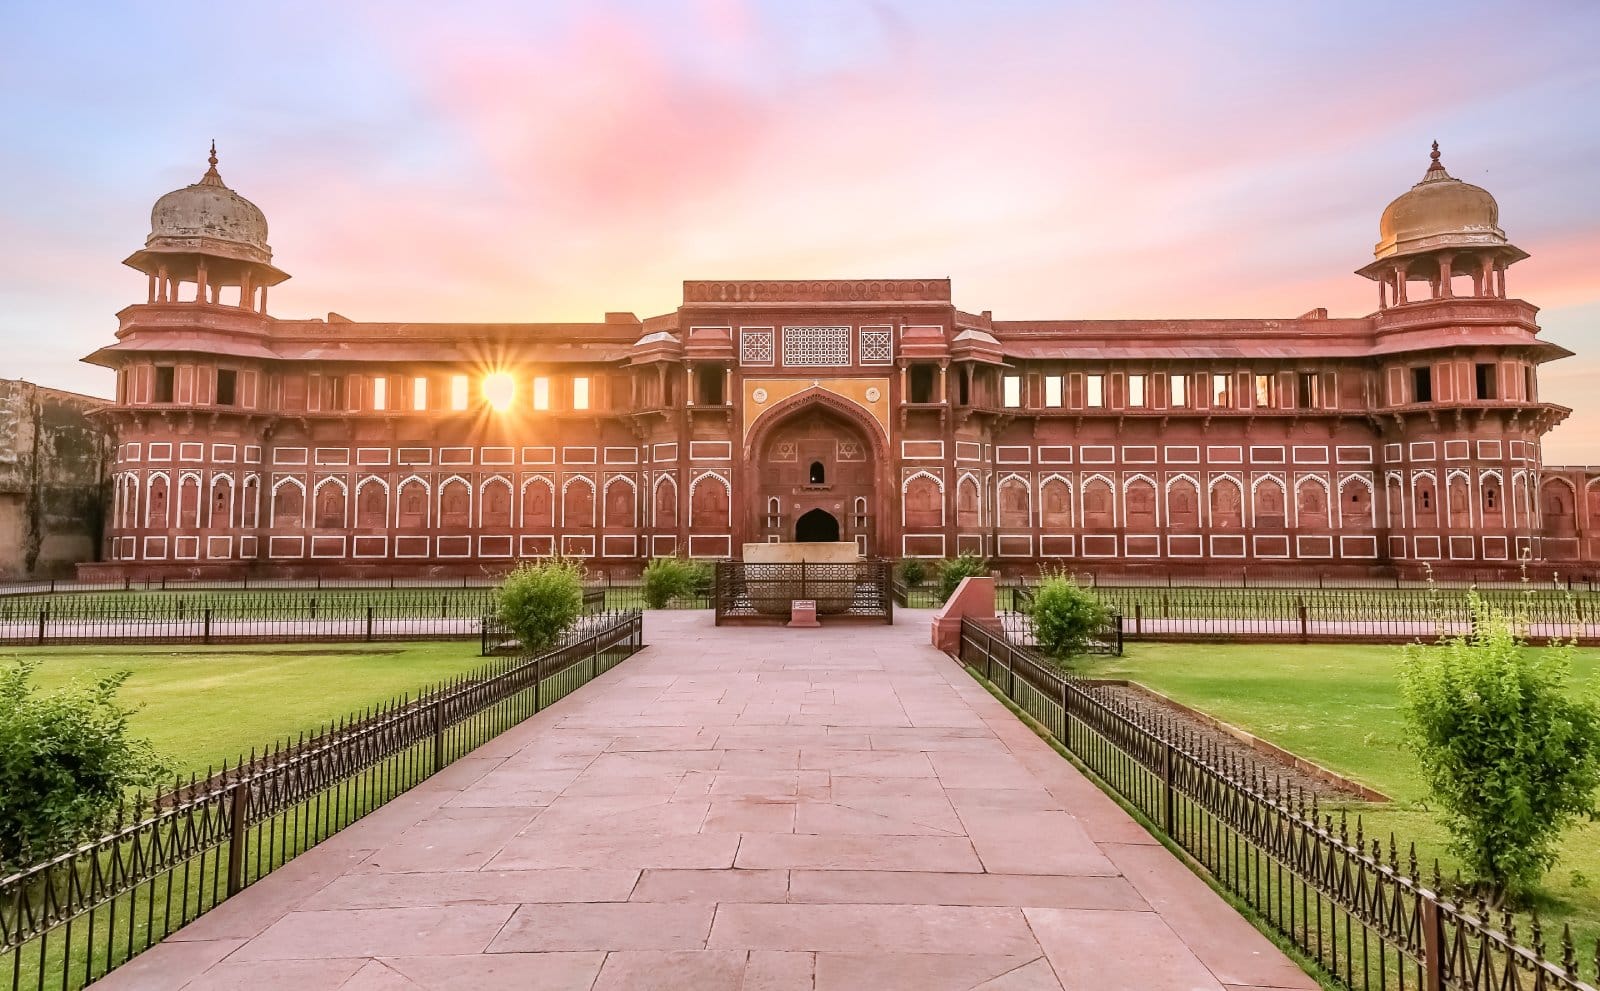 <p class="wp-caption-text">Image Credit: Shutterstock / Roop_Dey</p>  <p><span>While the Taj Mahal is Agra’s crown jewel, the city’s Mughal heritage offers much more to explore. The Agra Fort, a UNESCO World Heritage Site, is a red sandstone fortress that served as the residence of the emperors of the Mughal Dynasty. It houses several exquisite buildings, such as the Jahangir Palace and the Khas Mahal. Akbar’s Tomb in Sikandra offers a serene and less crowded historical site, showcasing the architectural brilliance of Mughal art and design.</span></p>